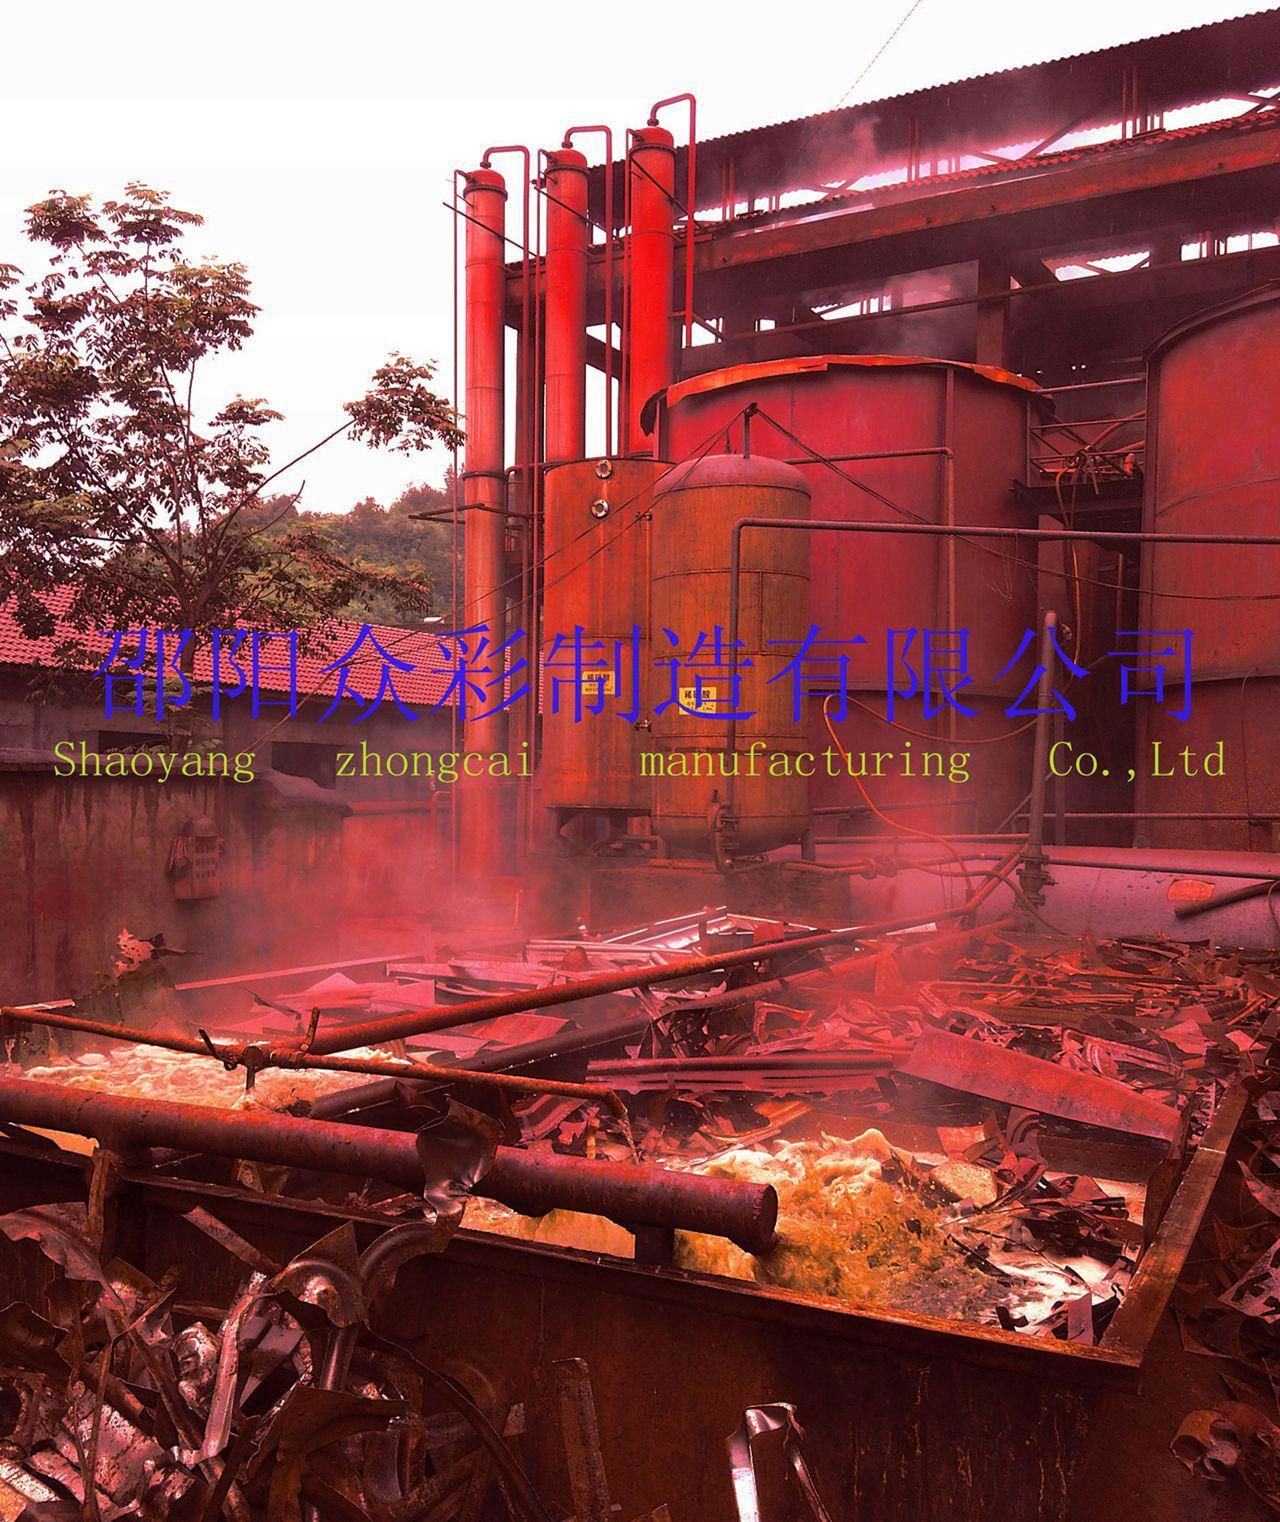 Iron oxide red 4